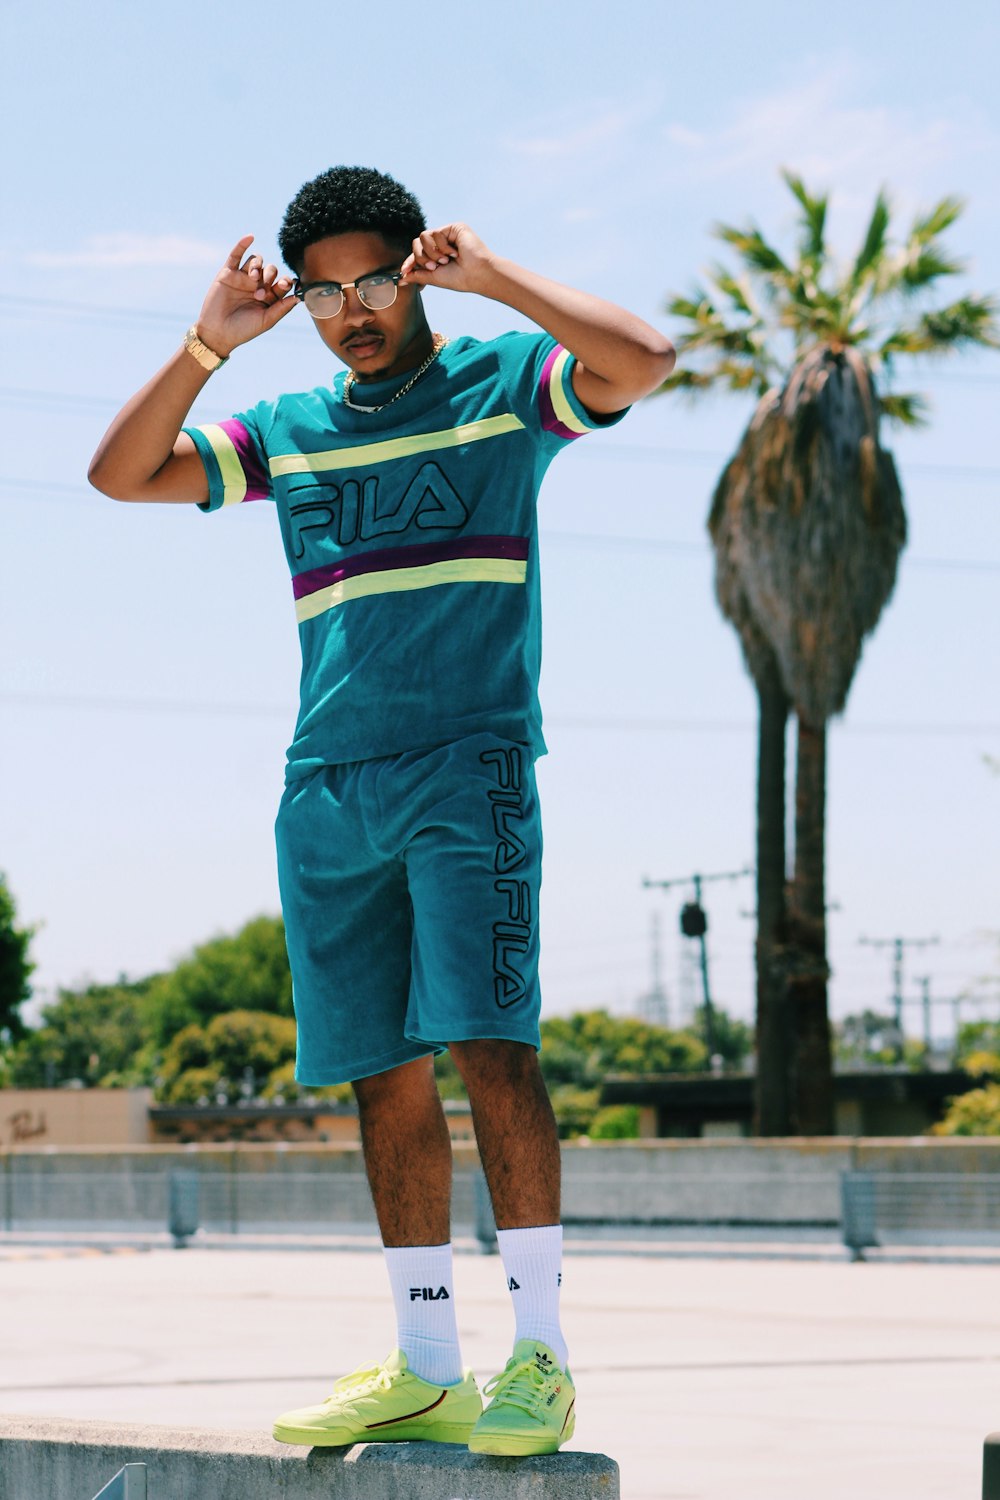 Man in teal Fila shirt and shorts standing on concrete ground photo – Free  Apparel Image on Unsplash